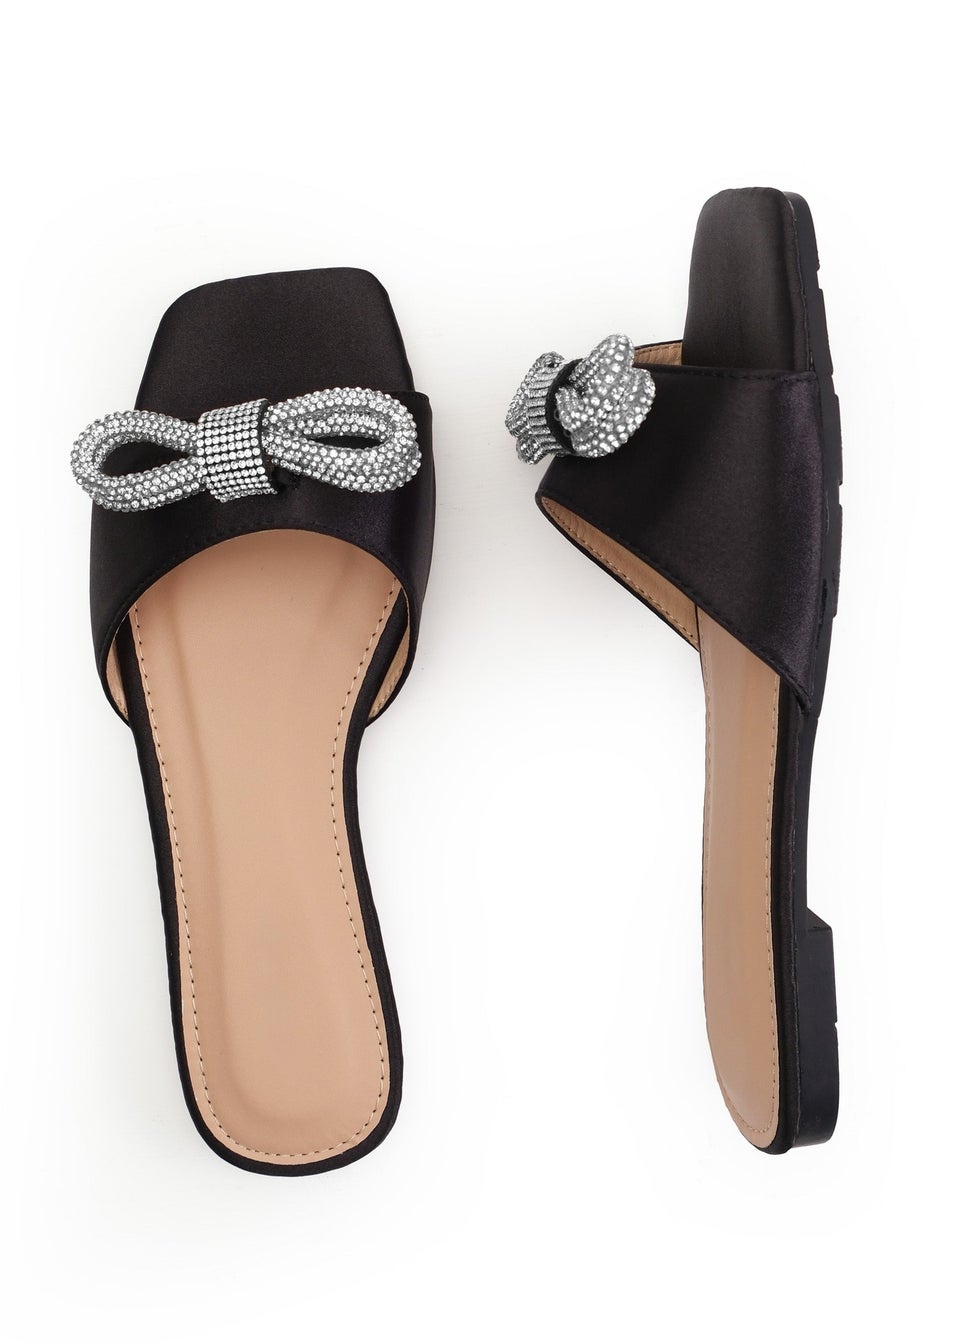 Where's That From Black Satin Abril Square Toe Flatform Sliders